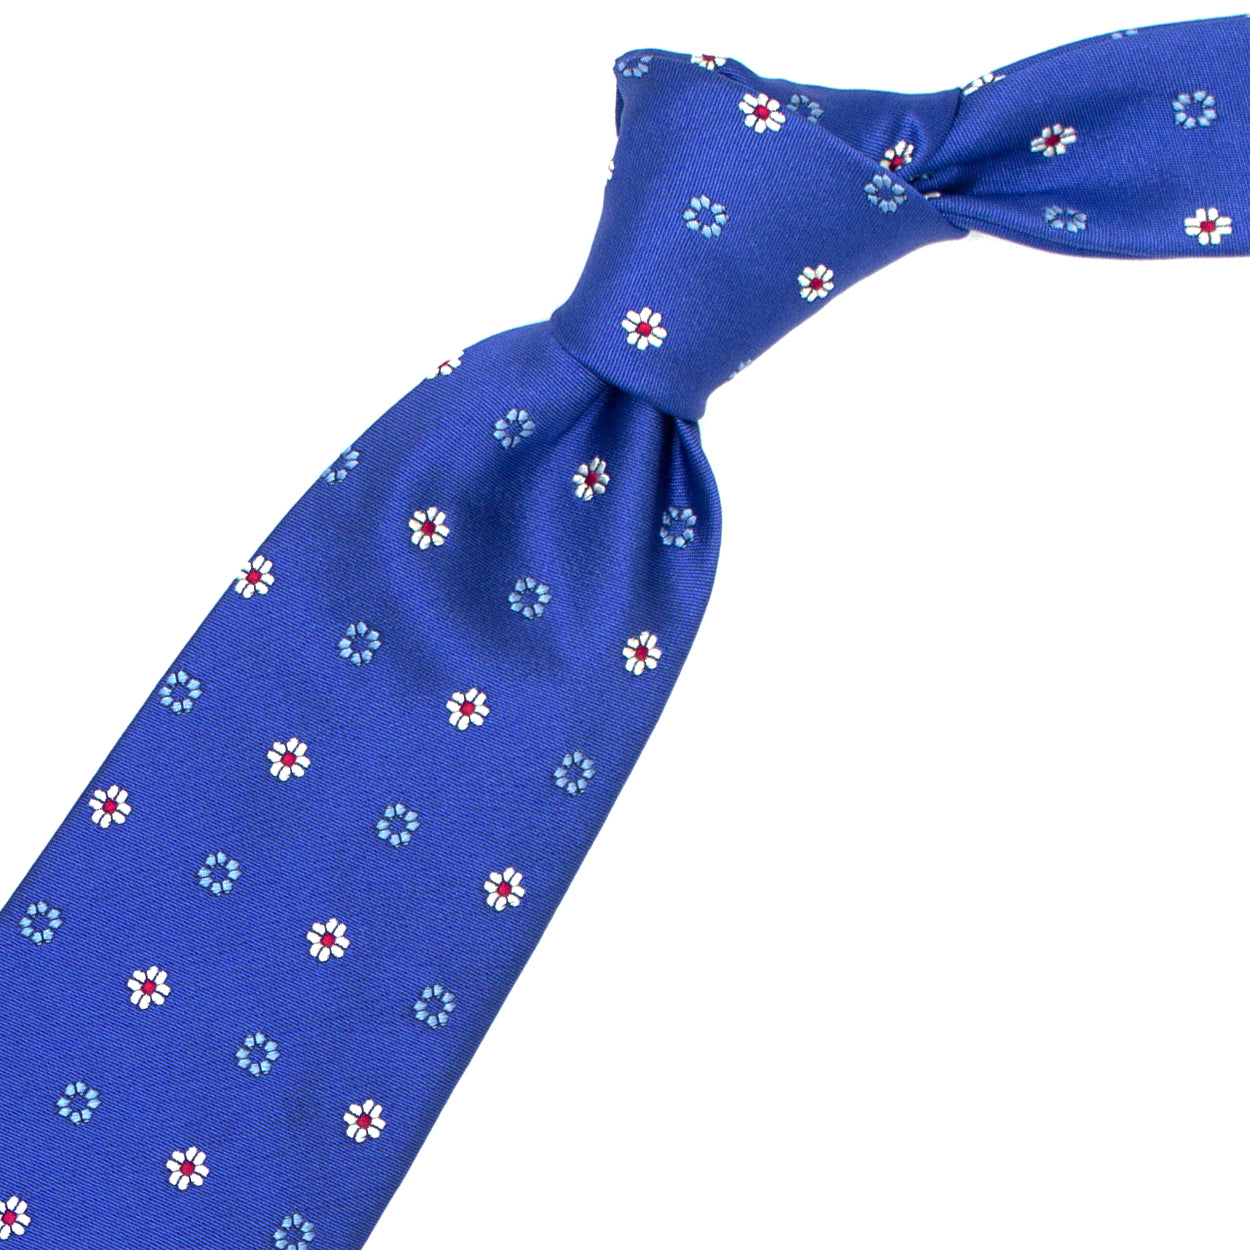 Blue tie with white, red and blue flowers